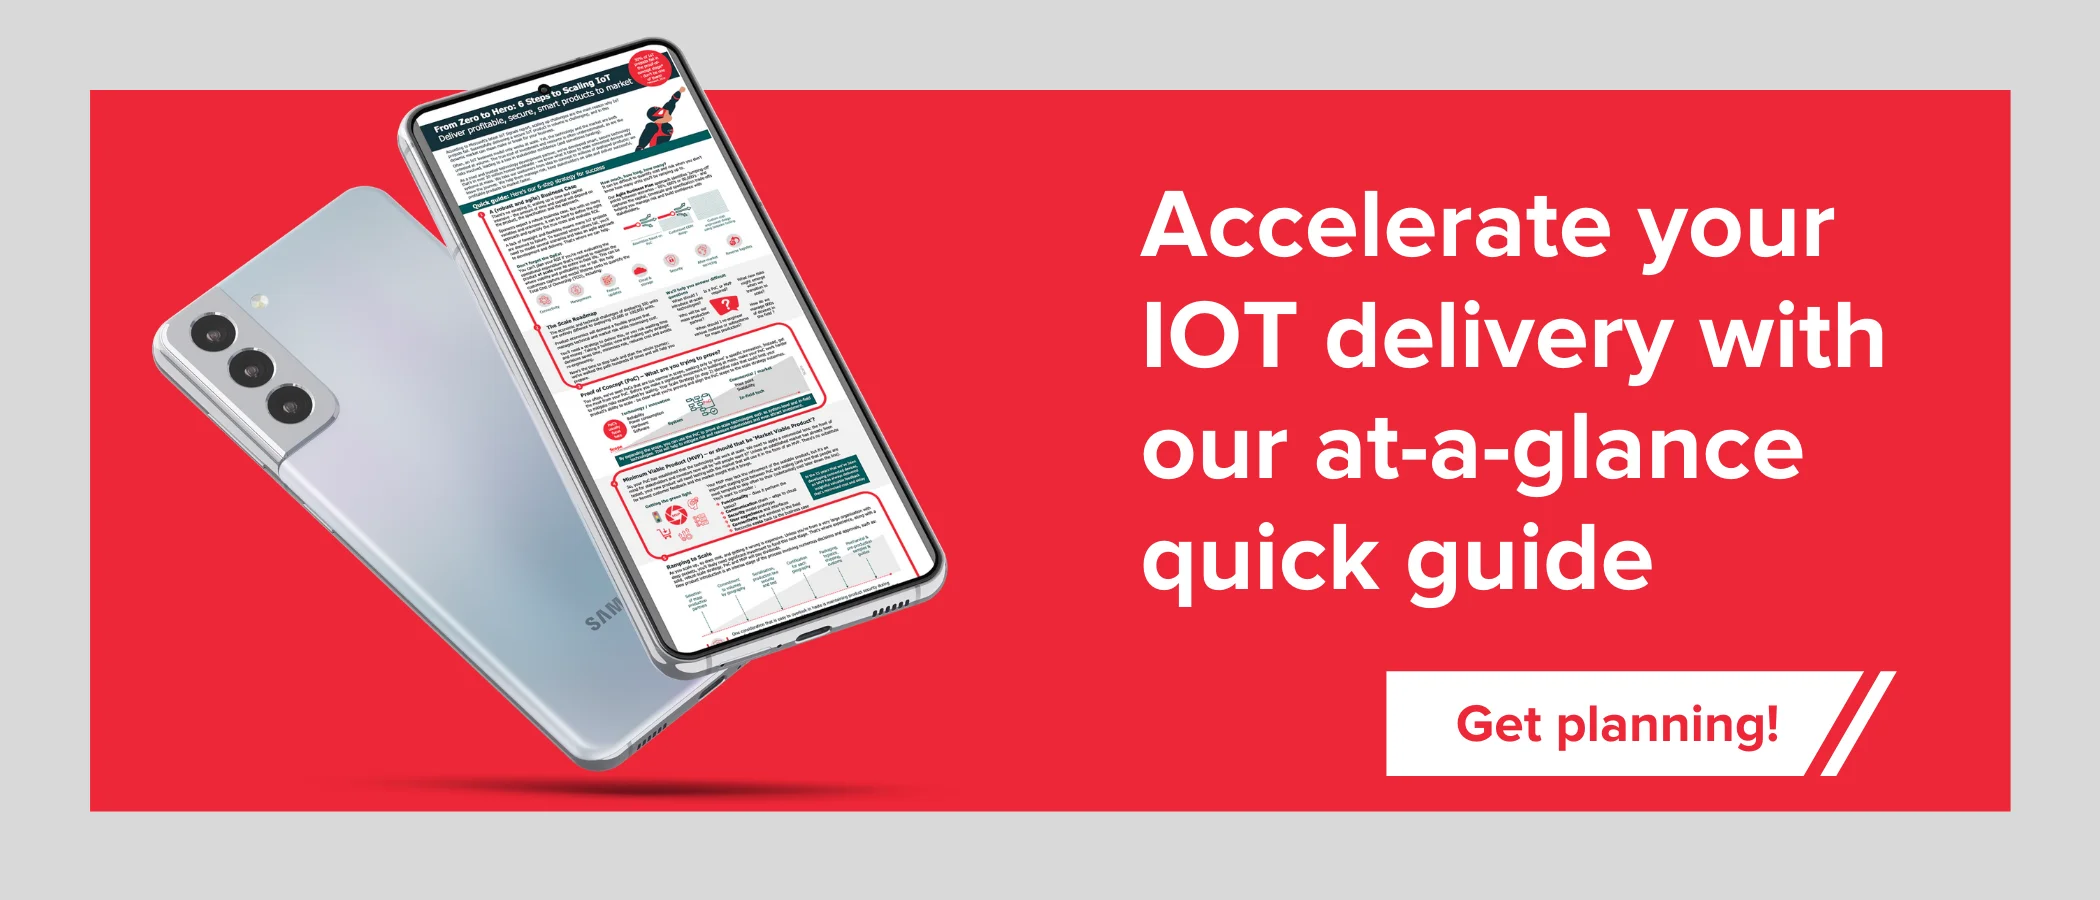 Quick Guide Accelerate your IoT delivery with our at-a-glance quick guide